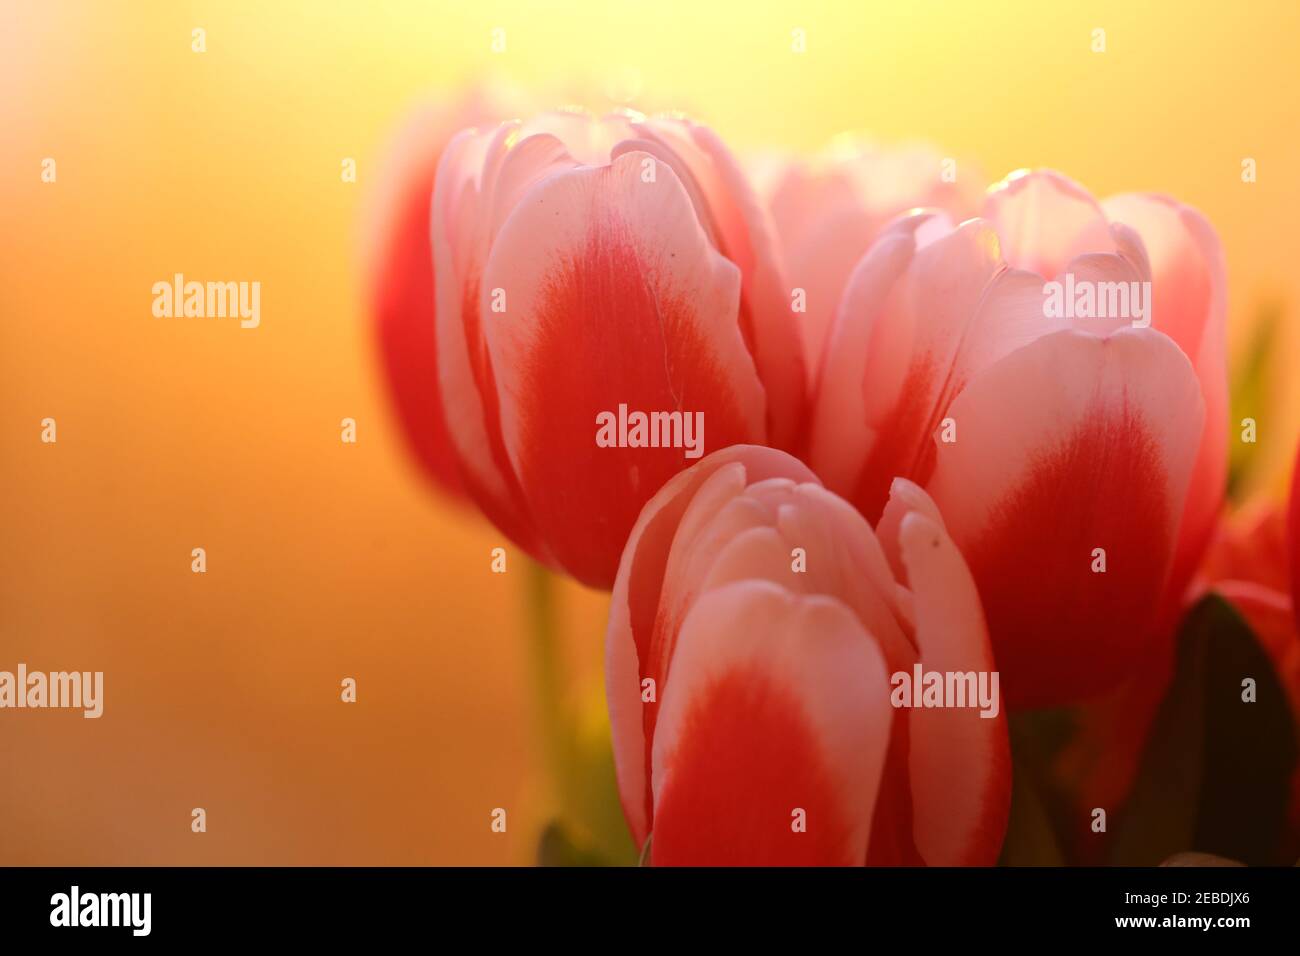 Tulip bouquet. Soft focus. Red-white tulips flowers on a orange blurred background. Flowers bouquet Stock Photo